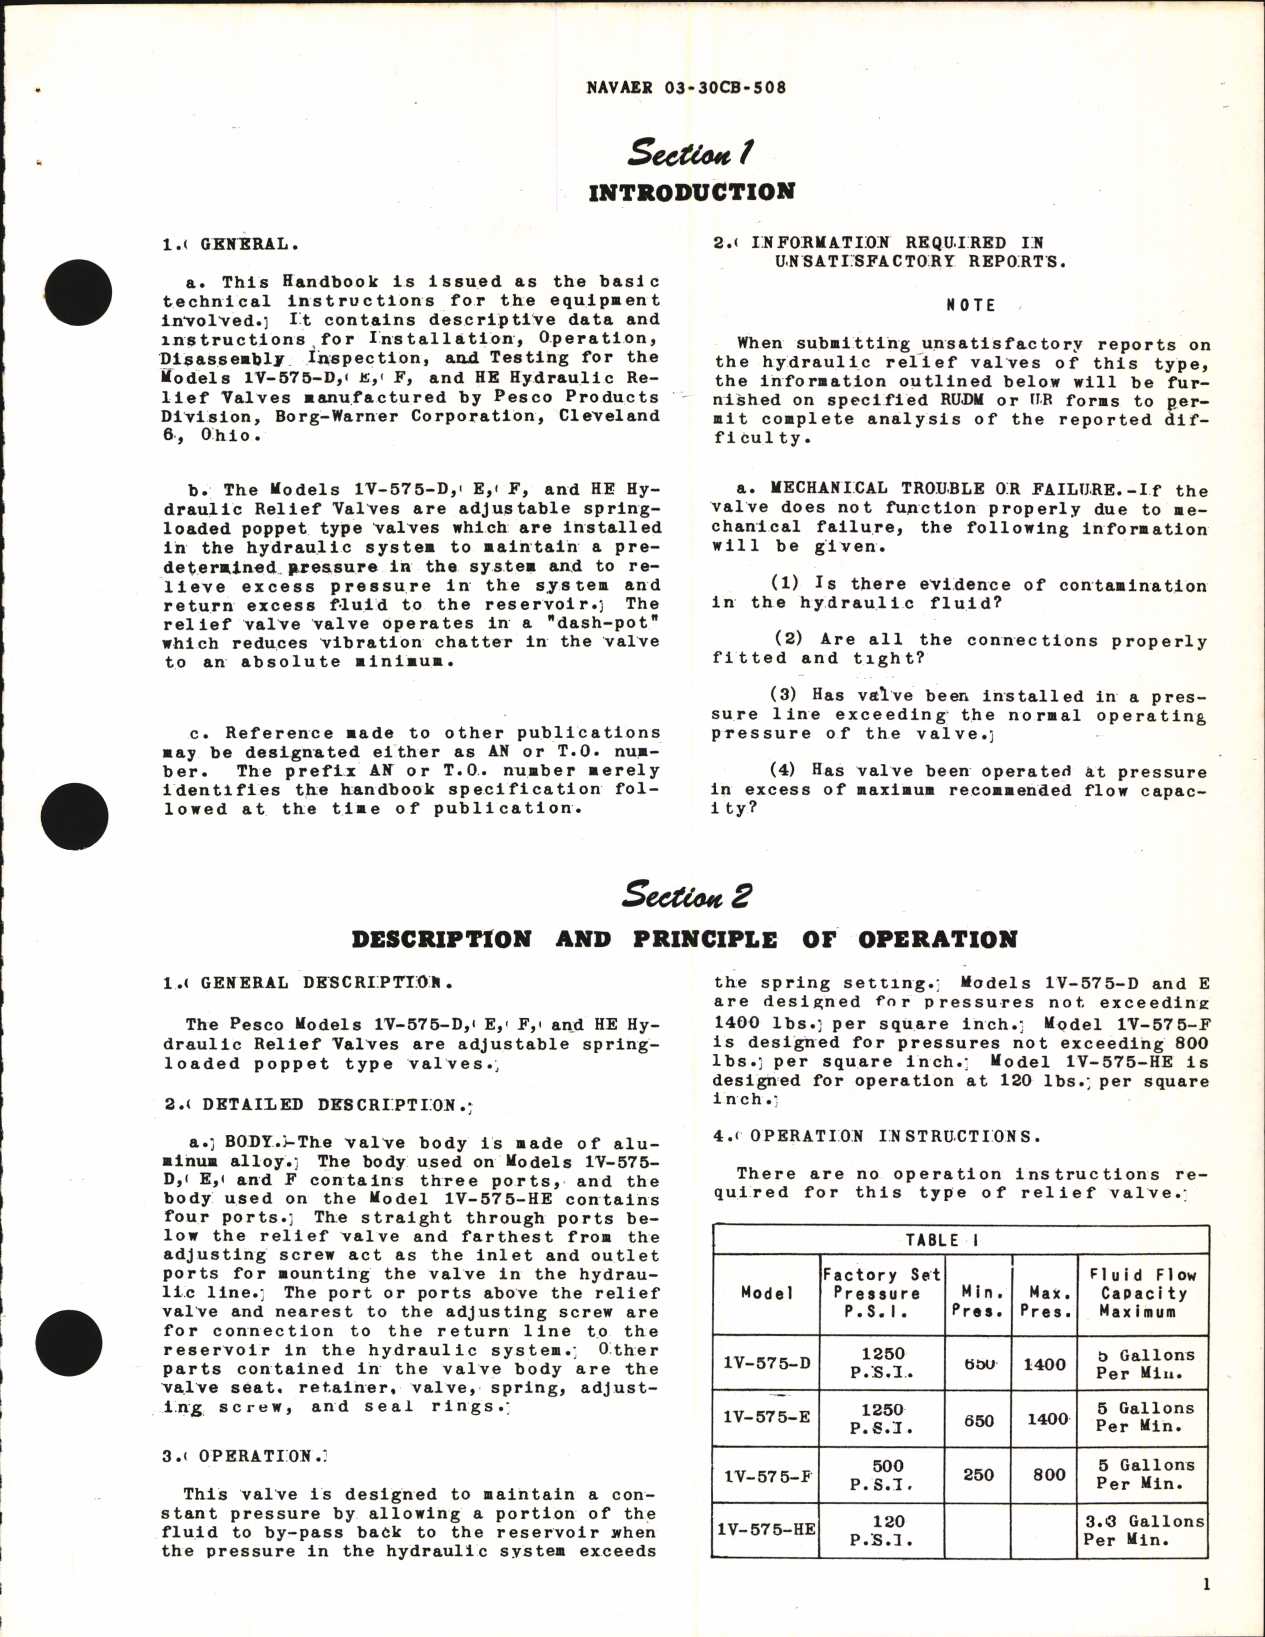 Sample page 5 from AirCorps Library document: Operation, Service and Overhaul Instructions with Parts Catalog for Hydraulic Relief Valves